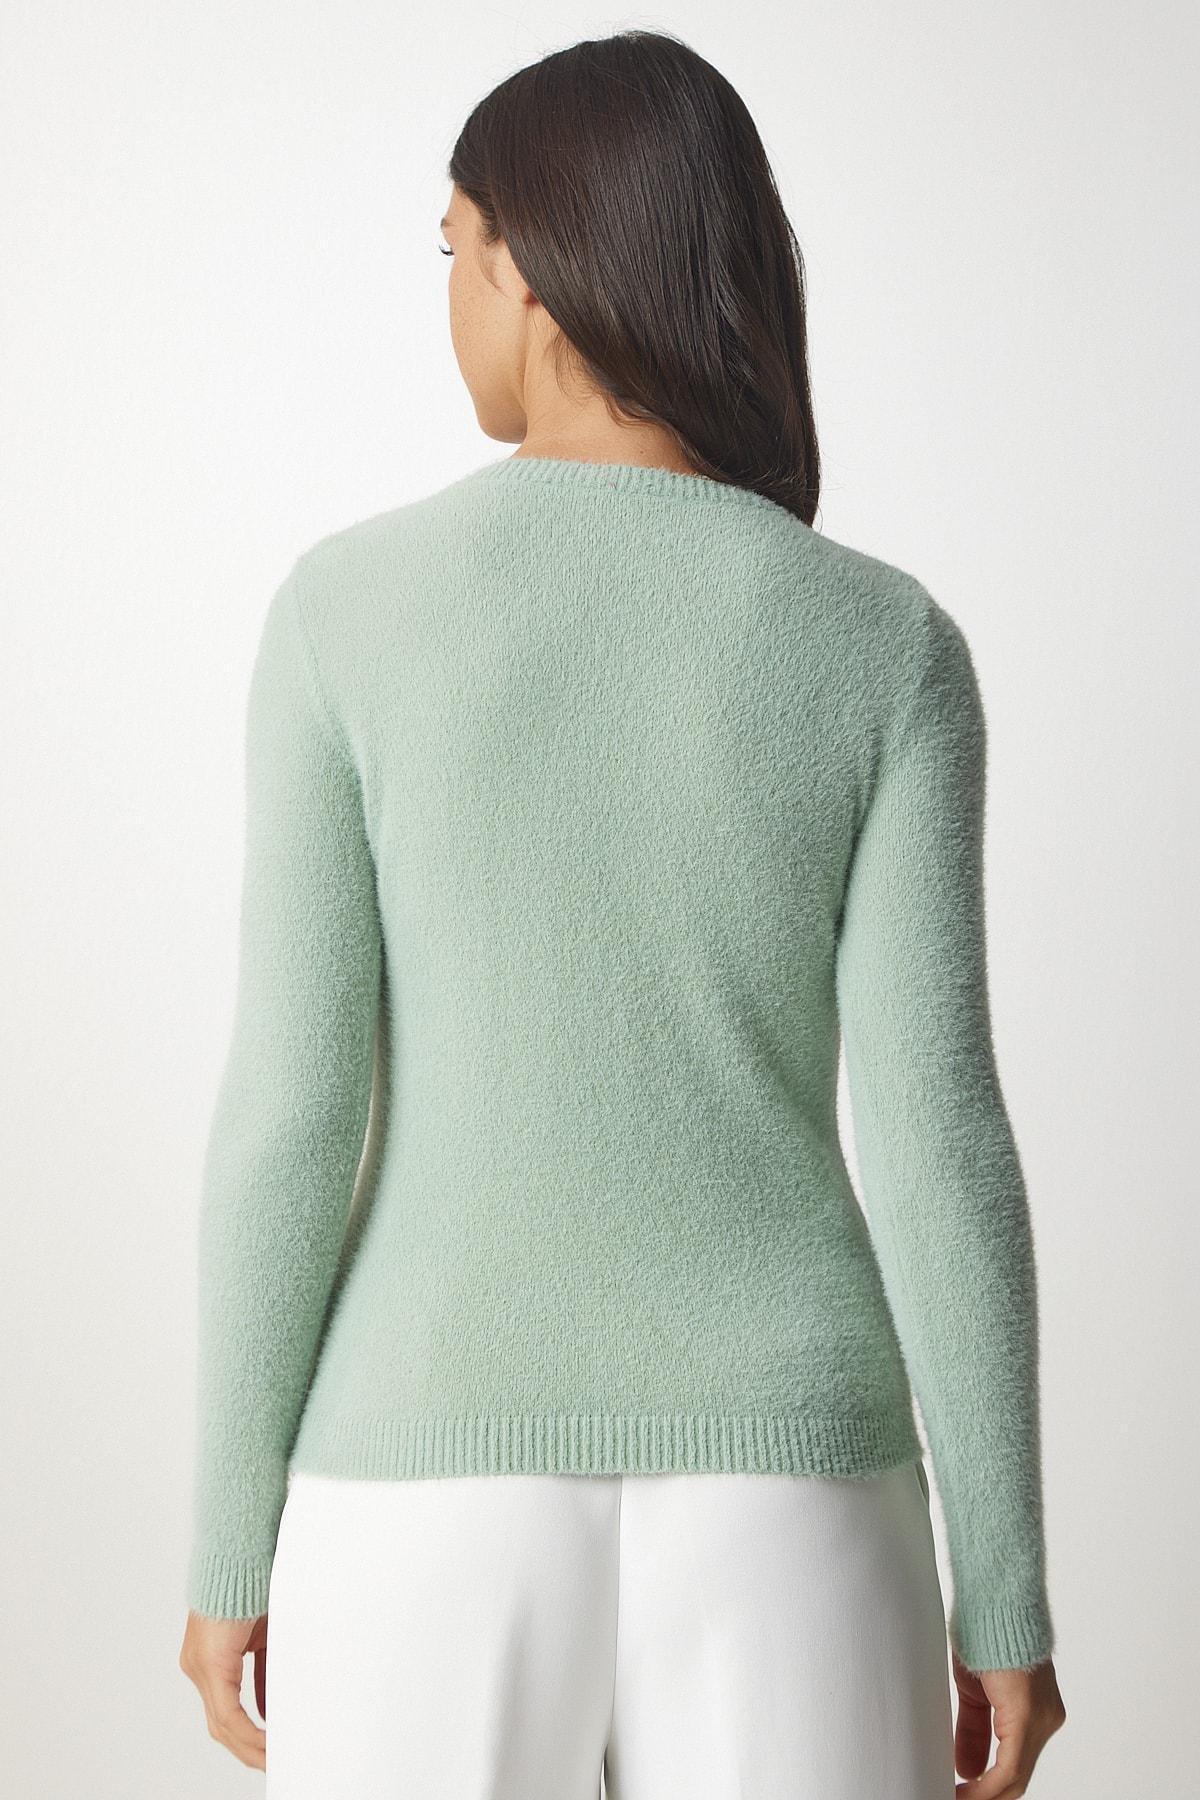 Happiness Istanbul - Green With Beard Basic Knitwear Sweater